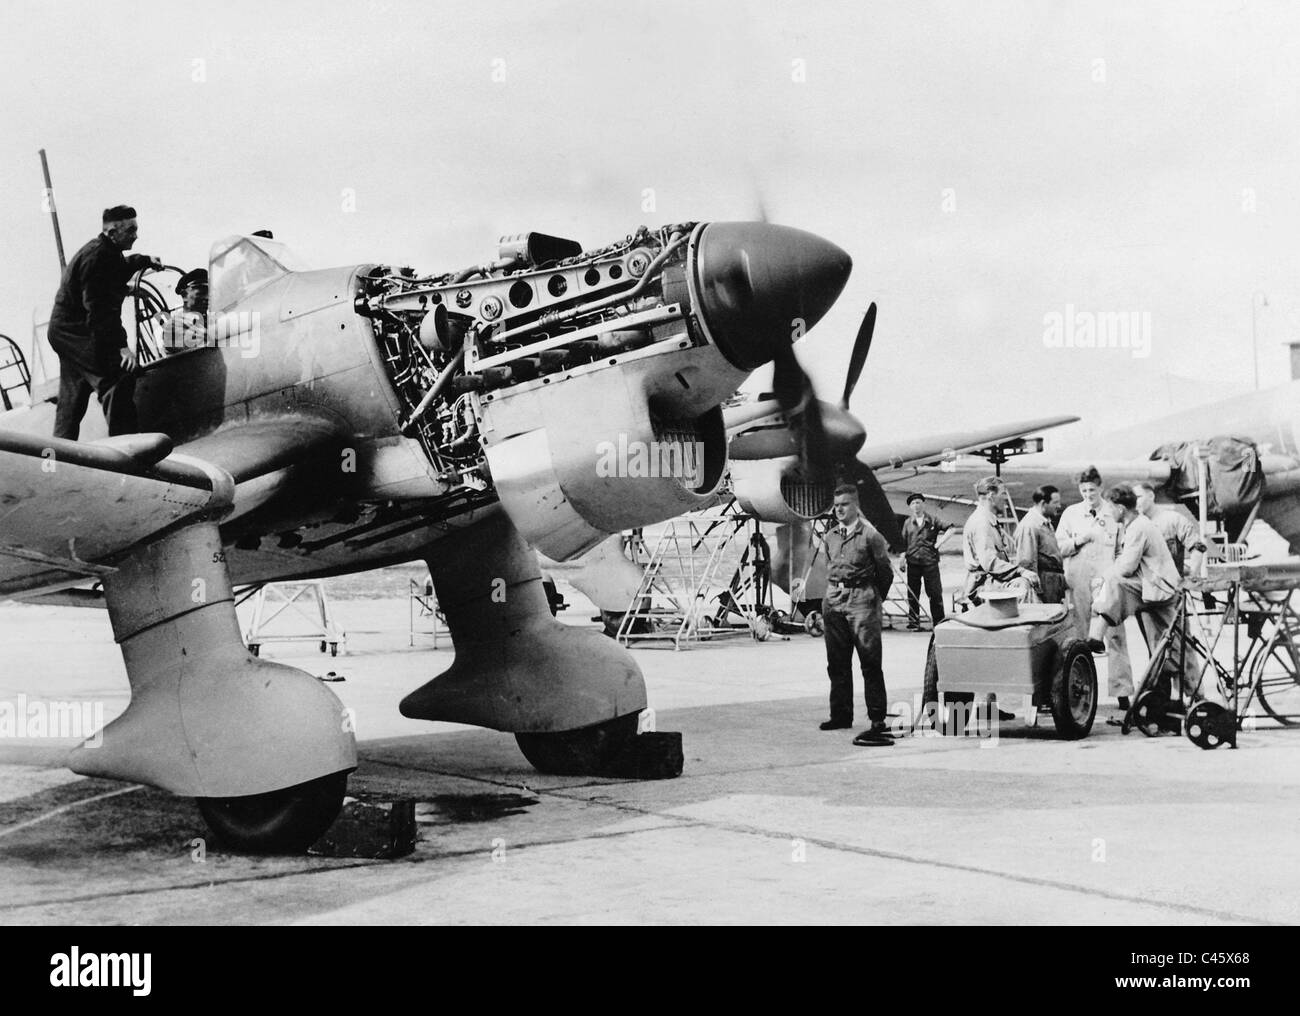 Ju 87 at the Junkers factory airfield, 1941 Stock Photo